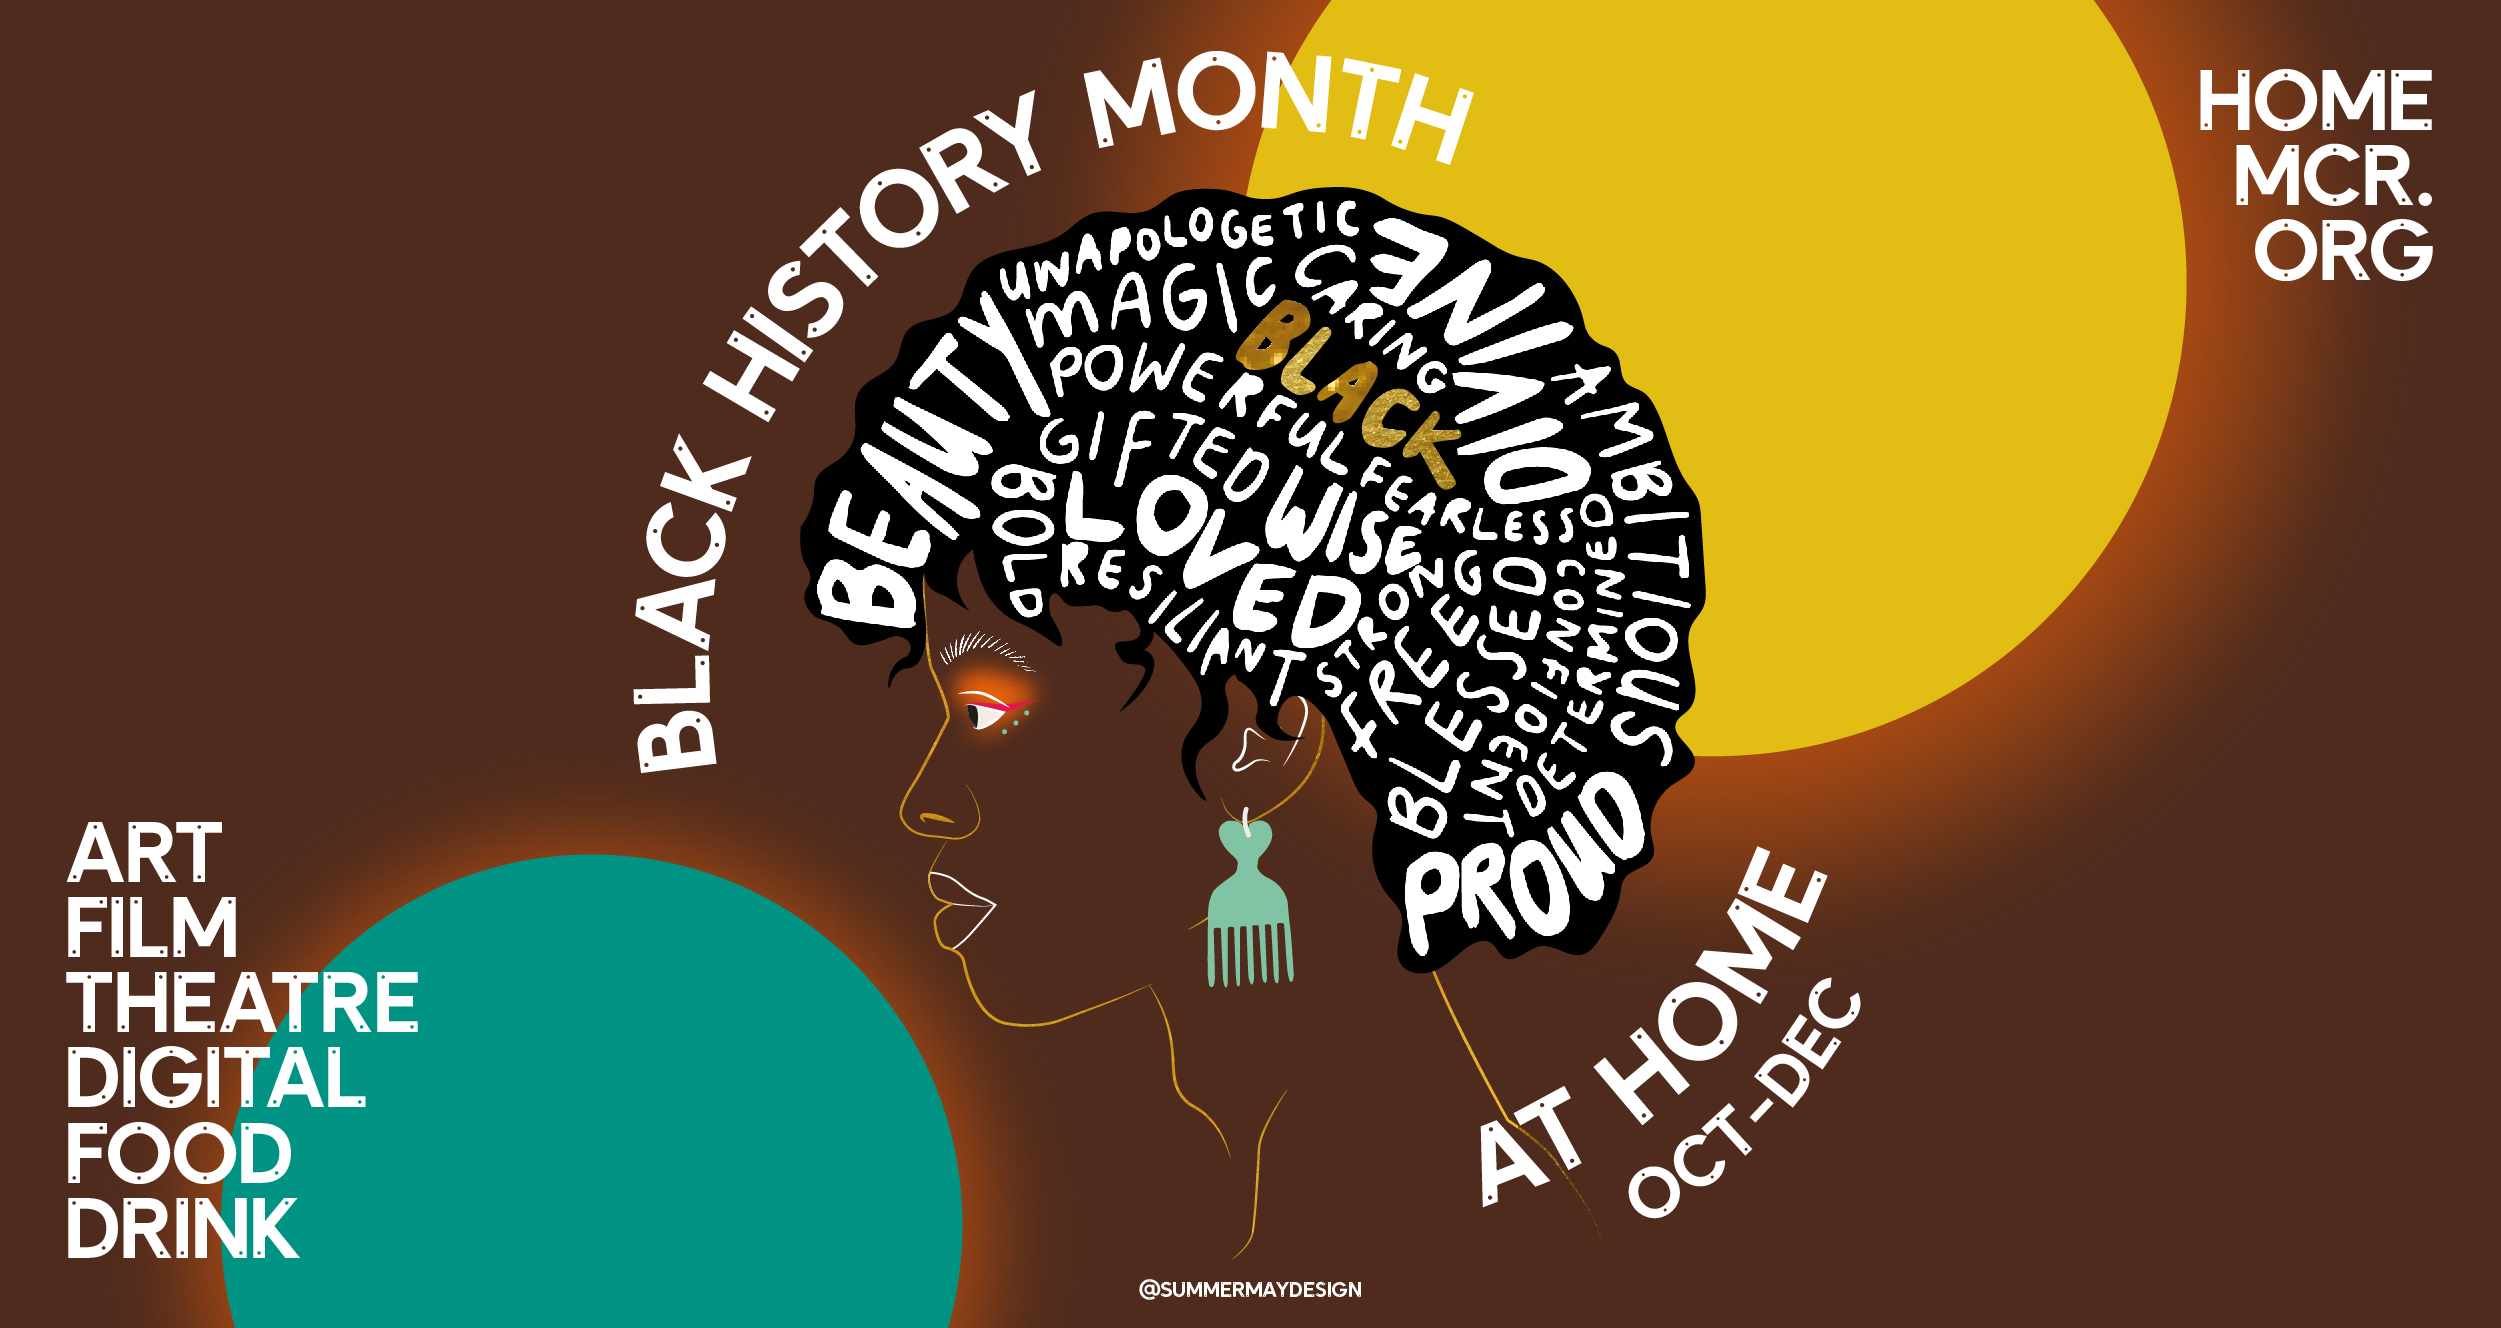 Home Black History Month